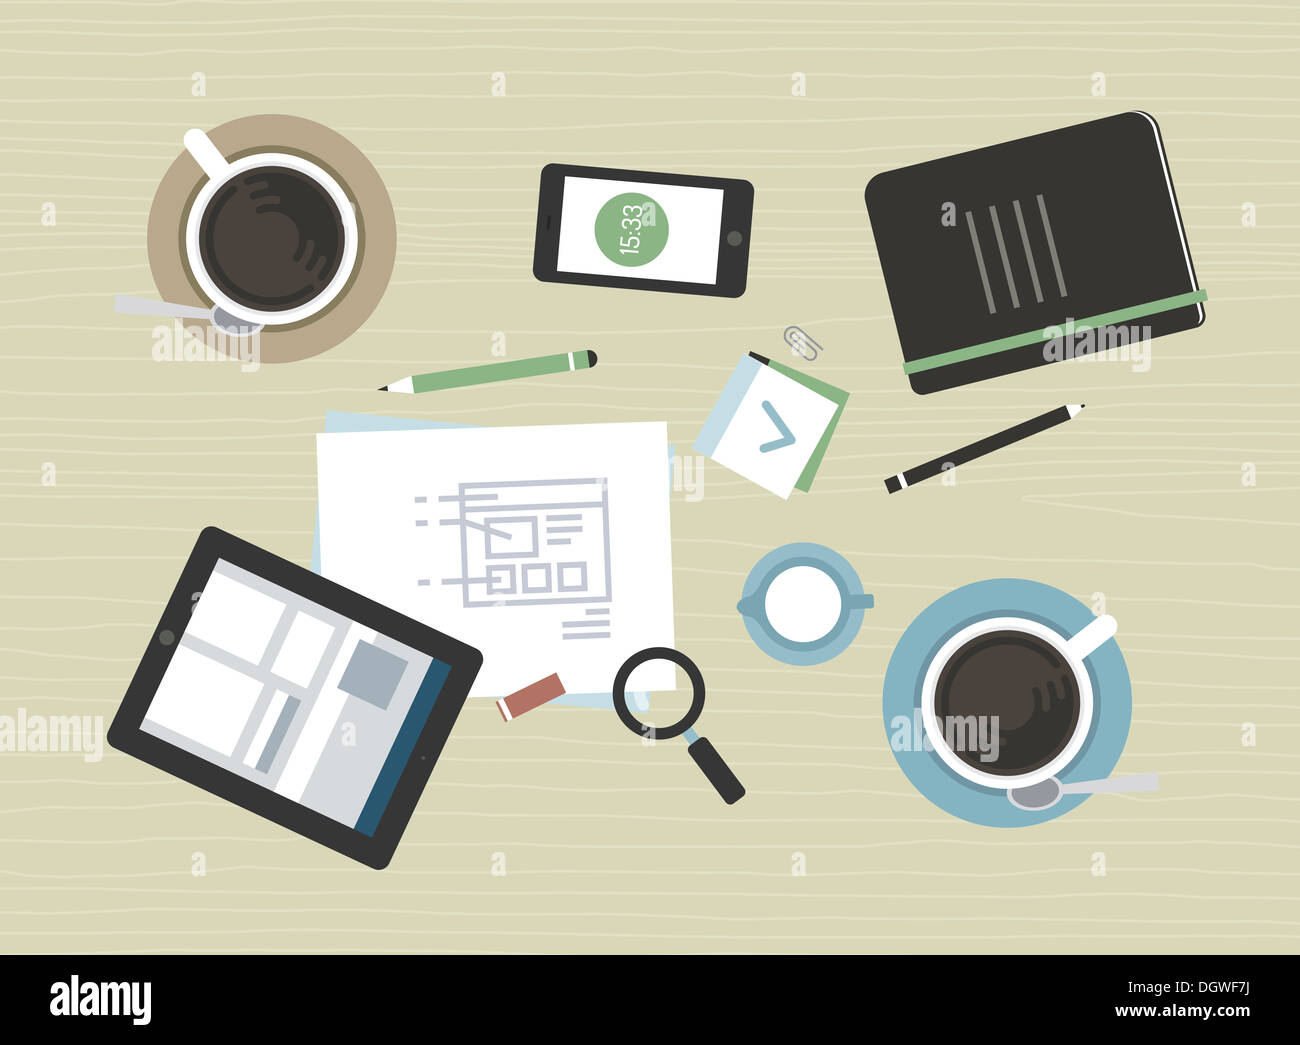 Flat design illustration concept of modern business meeting with coffee break and office objects. Stock Photo